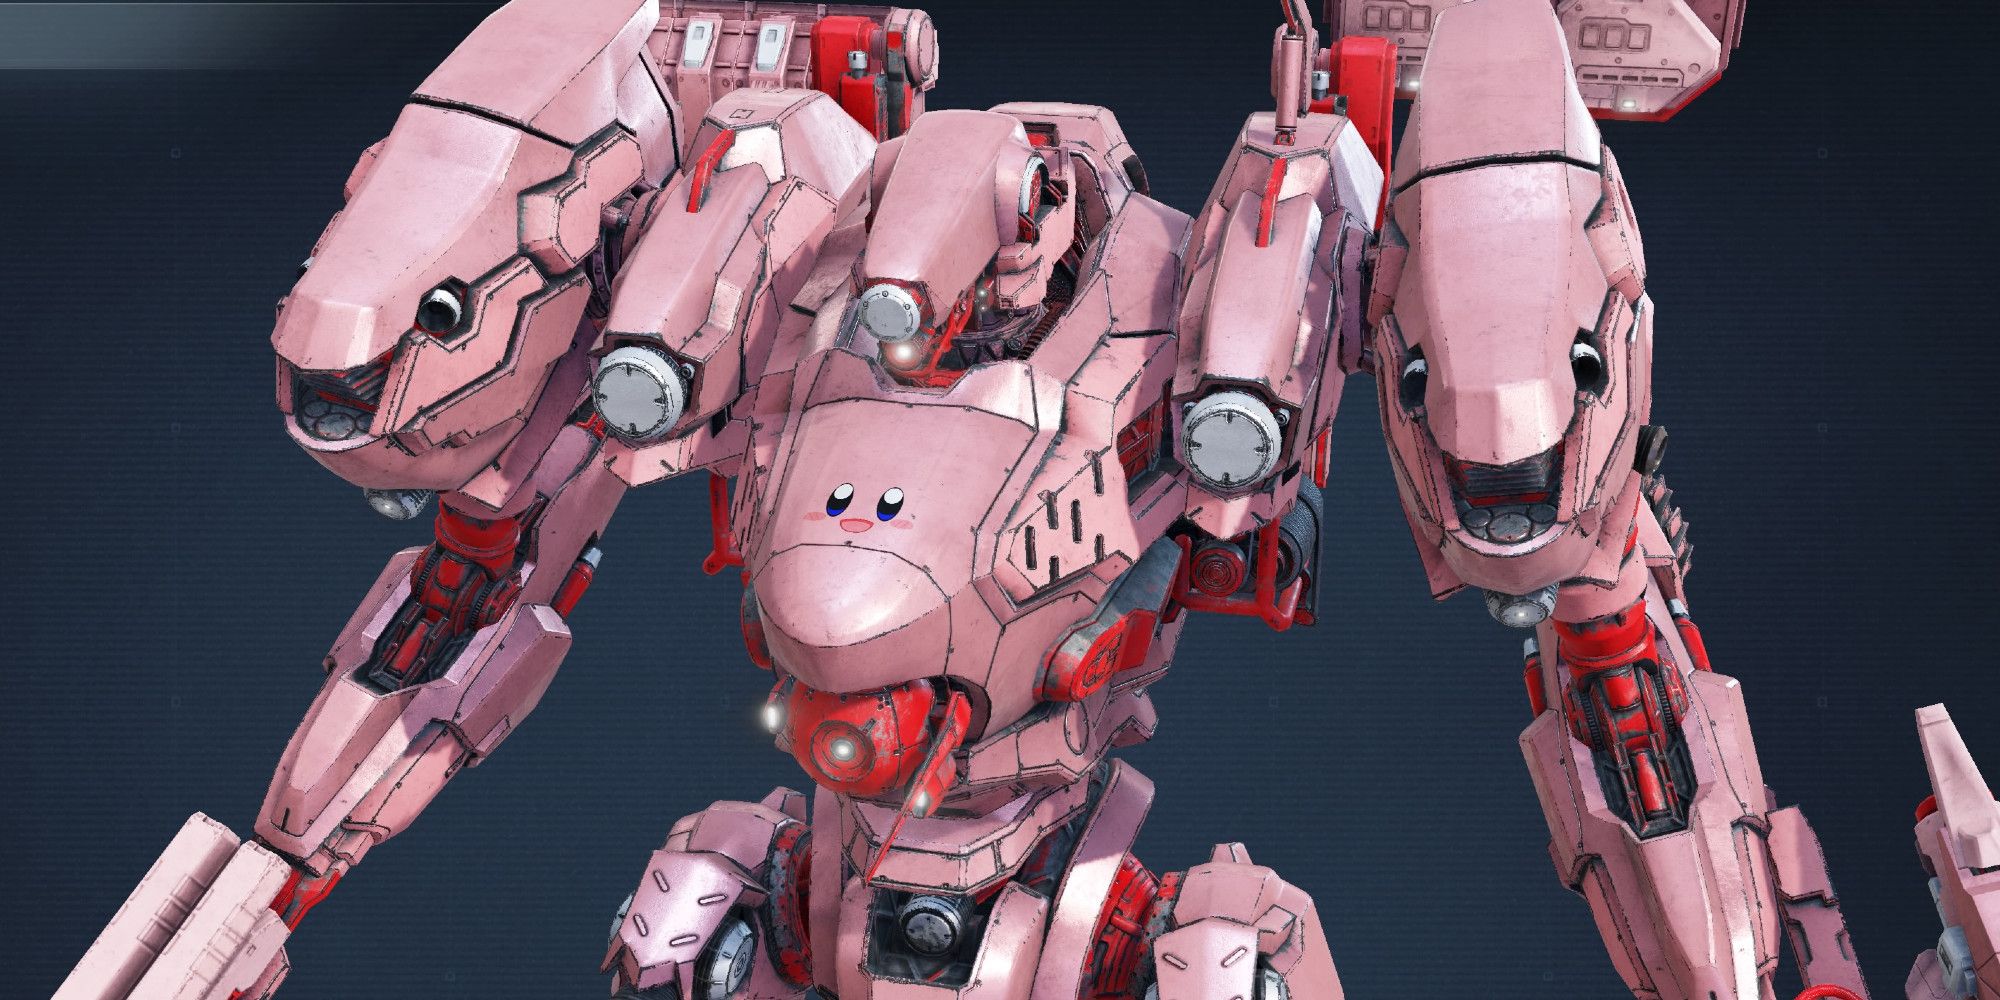 An Armored Core painted like Kirby